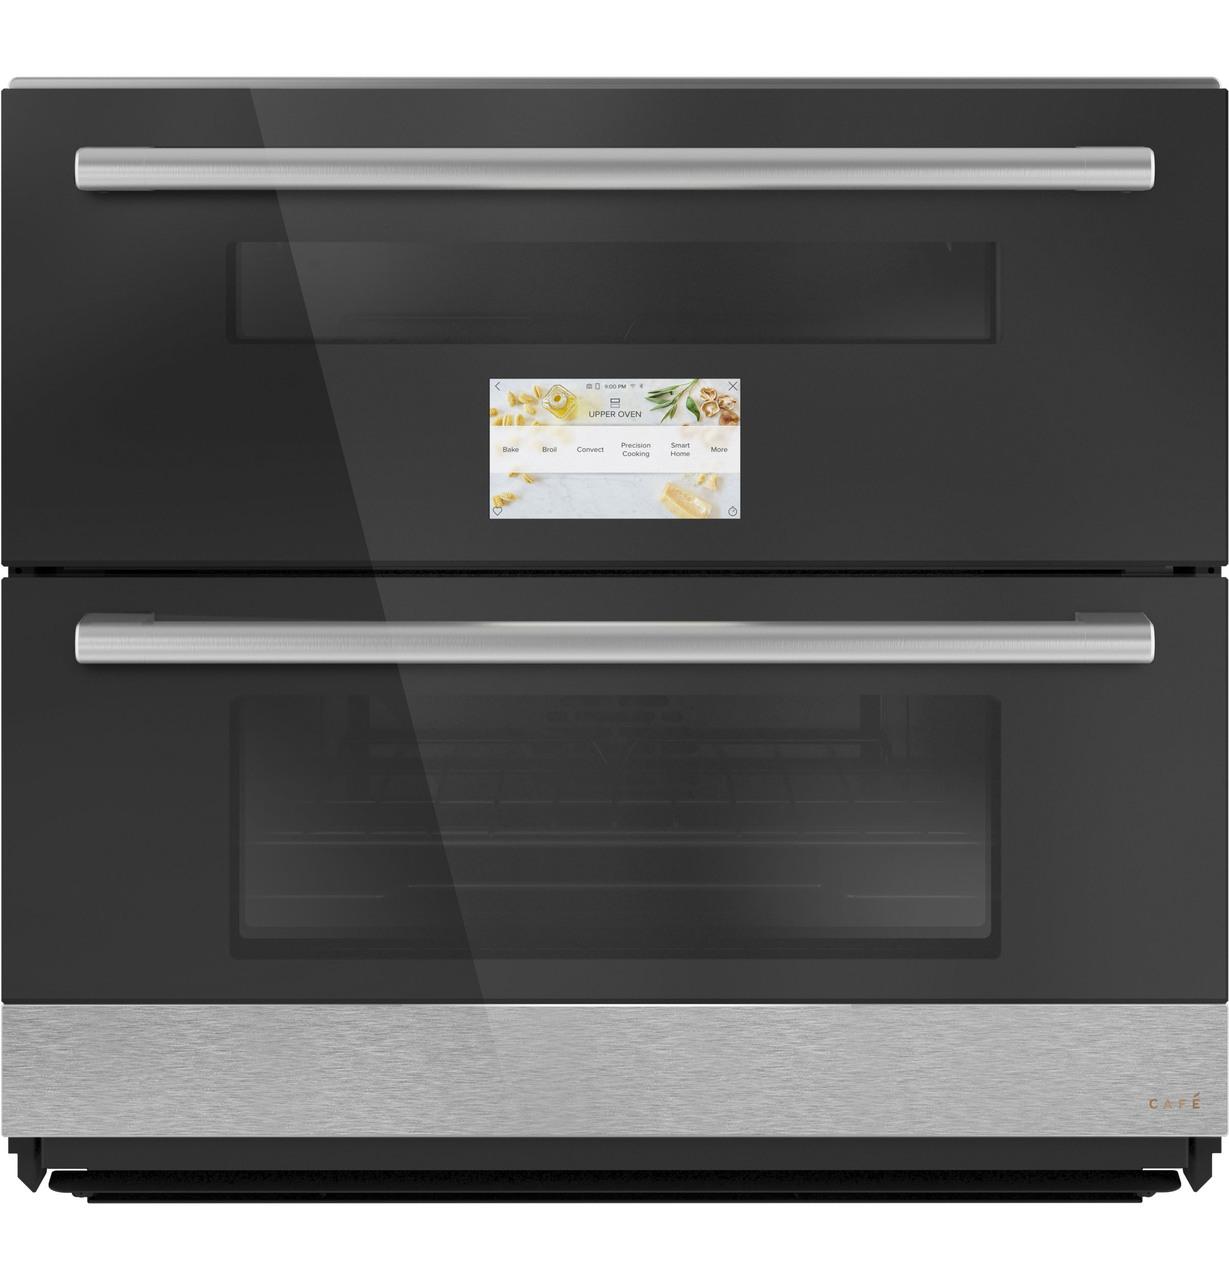 Cafe Caf(eback)™ 30" Duo Smart Single Wall Oven in Platinum Glass